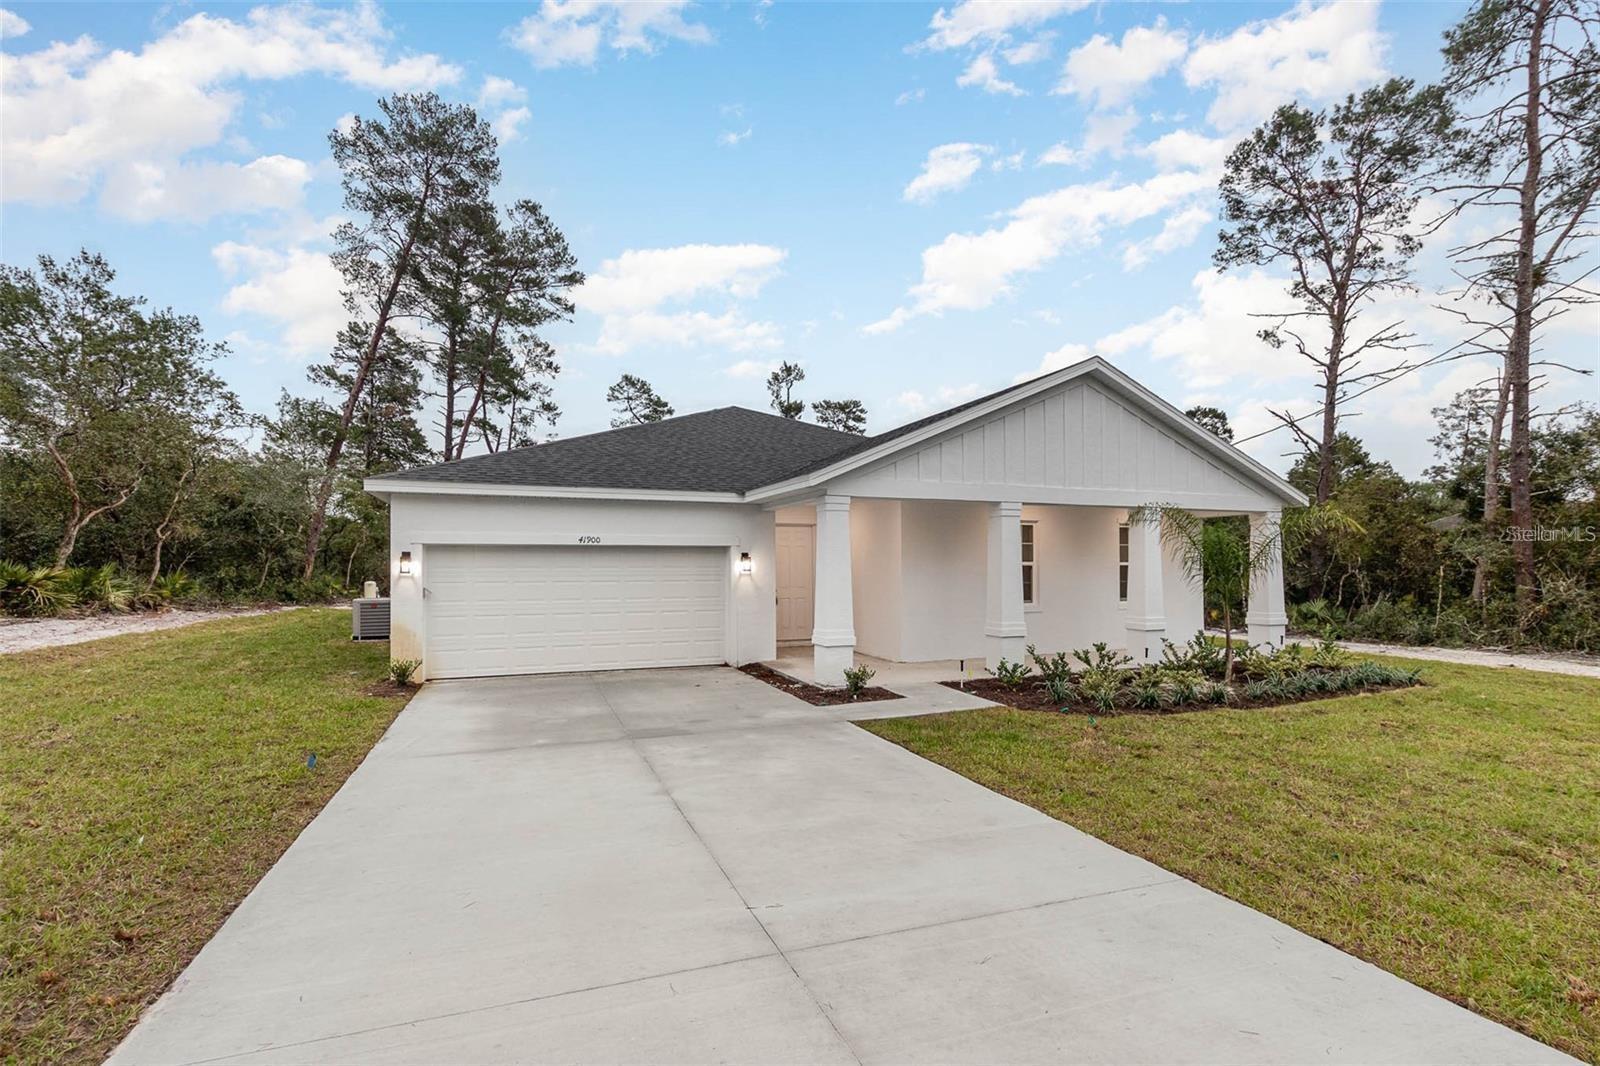 Photo one of 8198 Sw 129Th Ter Dunnellon FL 34432 | MLS O6194014